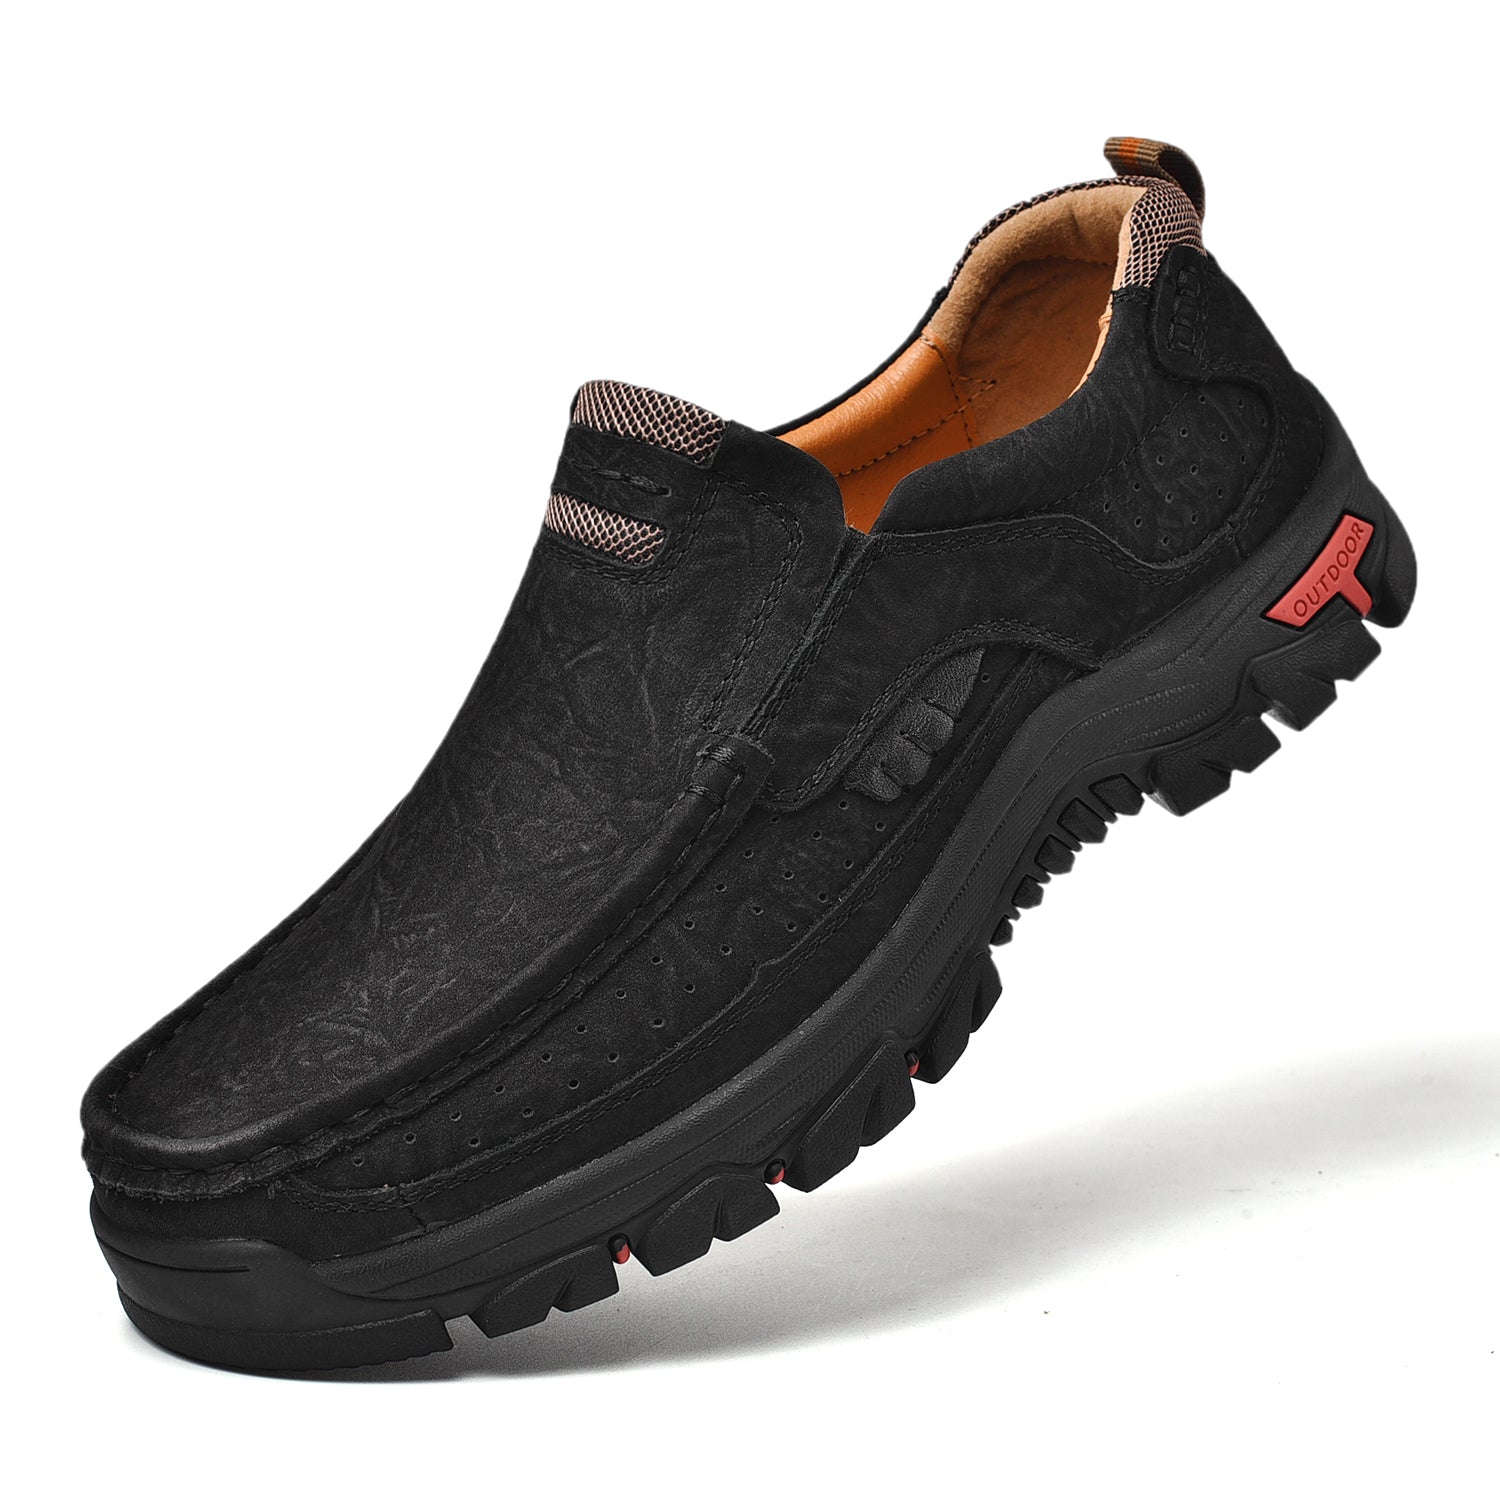 Mostelo® - Transition boots with orthopedic and extremely comfortable sole